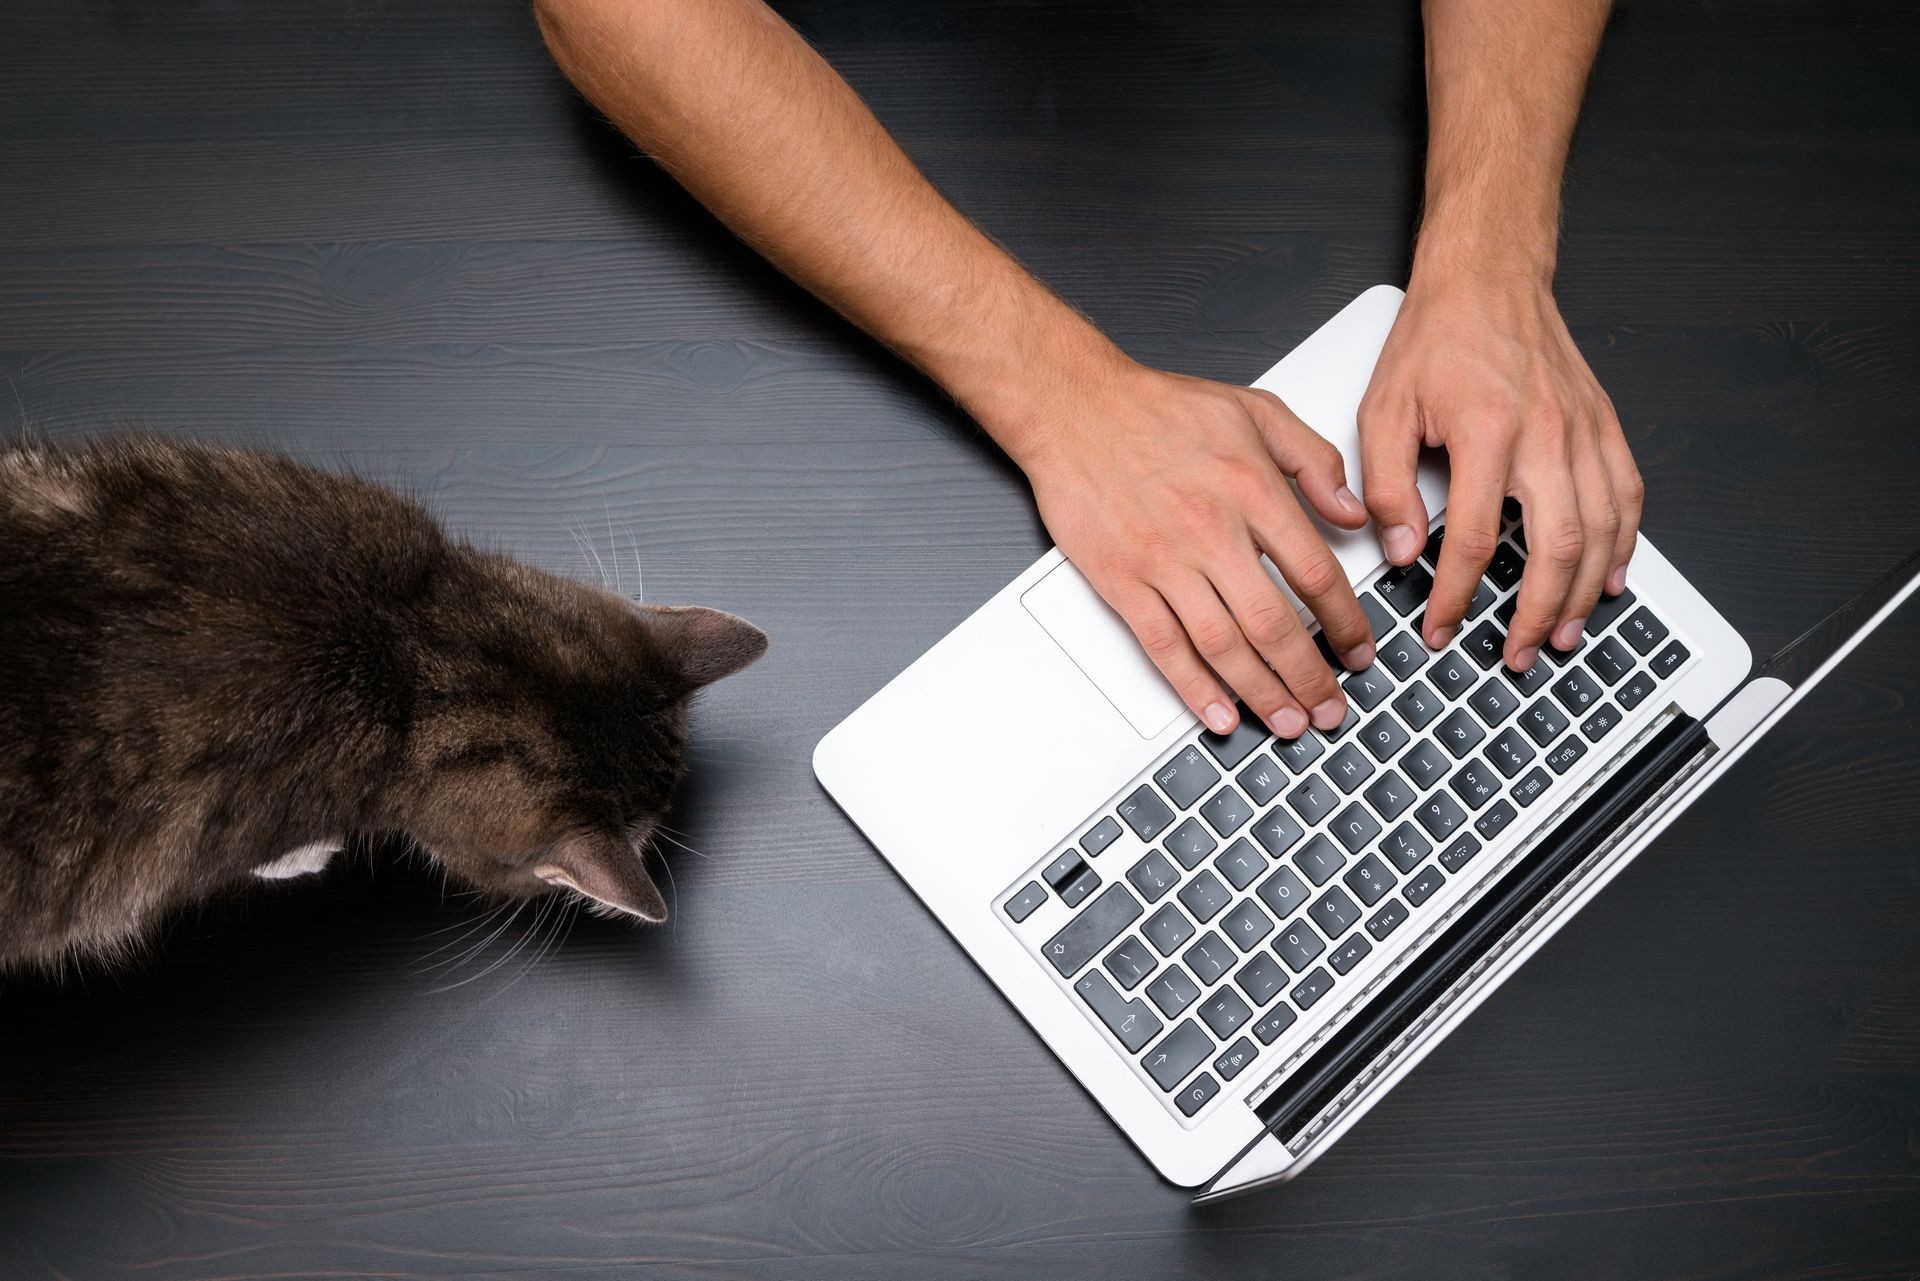 Man working in pet friendly office with cat by using a laptop computer on vintage wooden table. Hands typing on a keyboard. Top view, pet friendly business office workplace